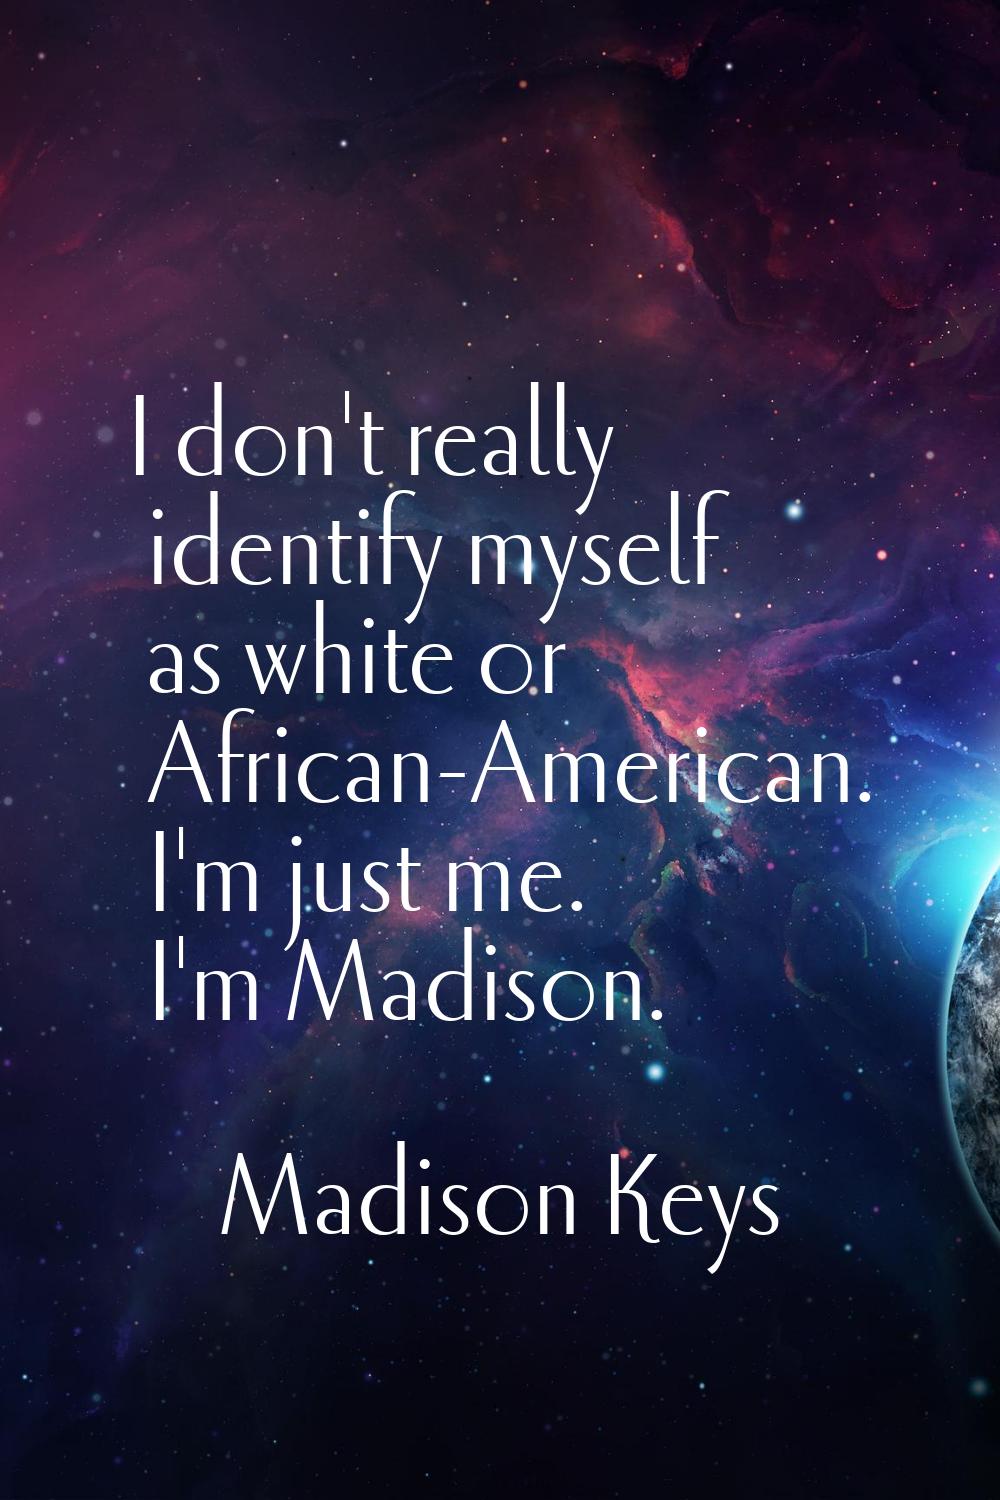 I don't really identify myself as white or African-American. I'm just me. I'm Madison.